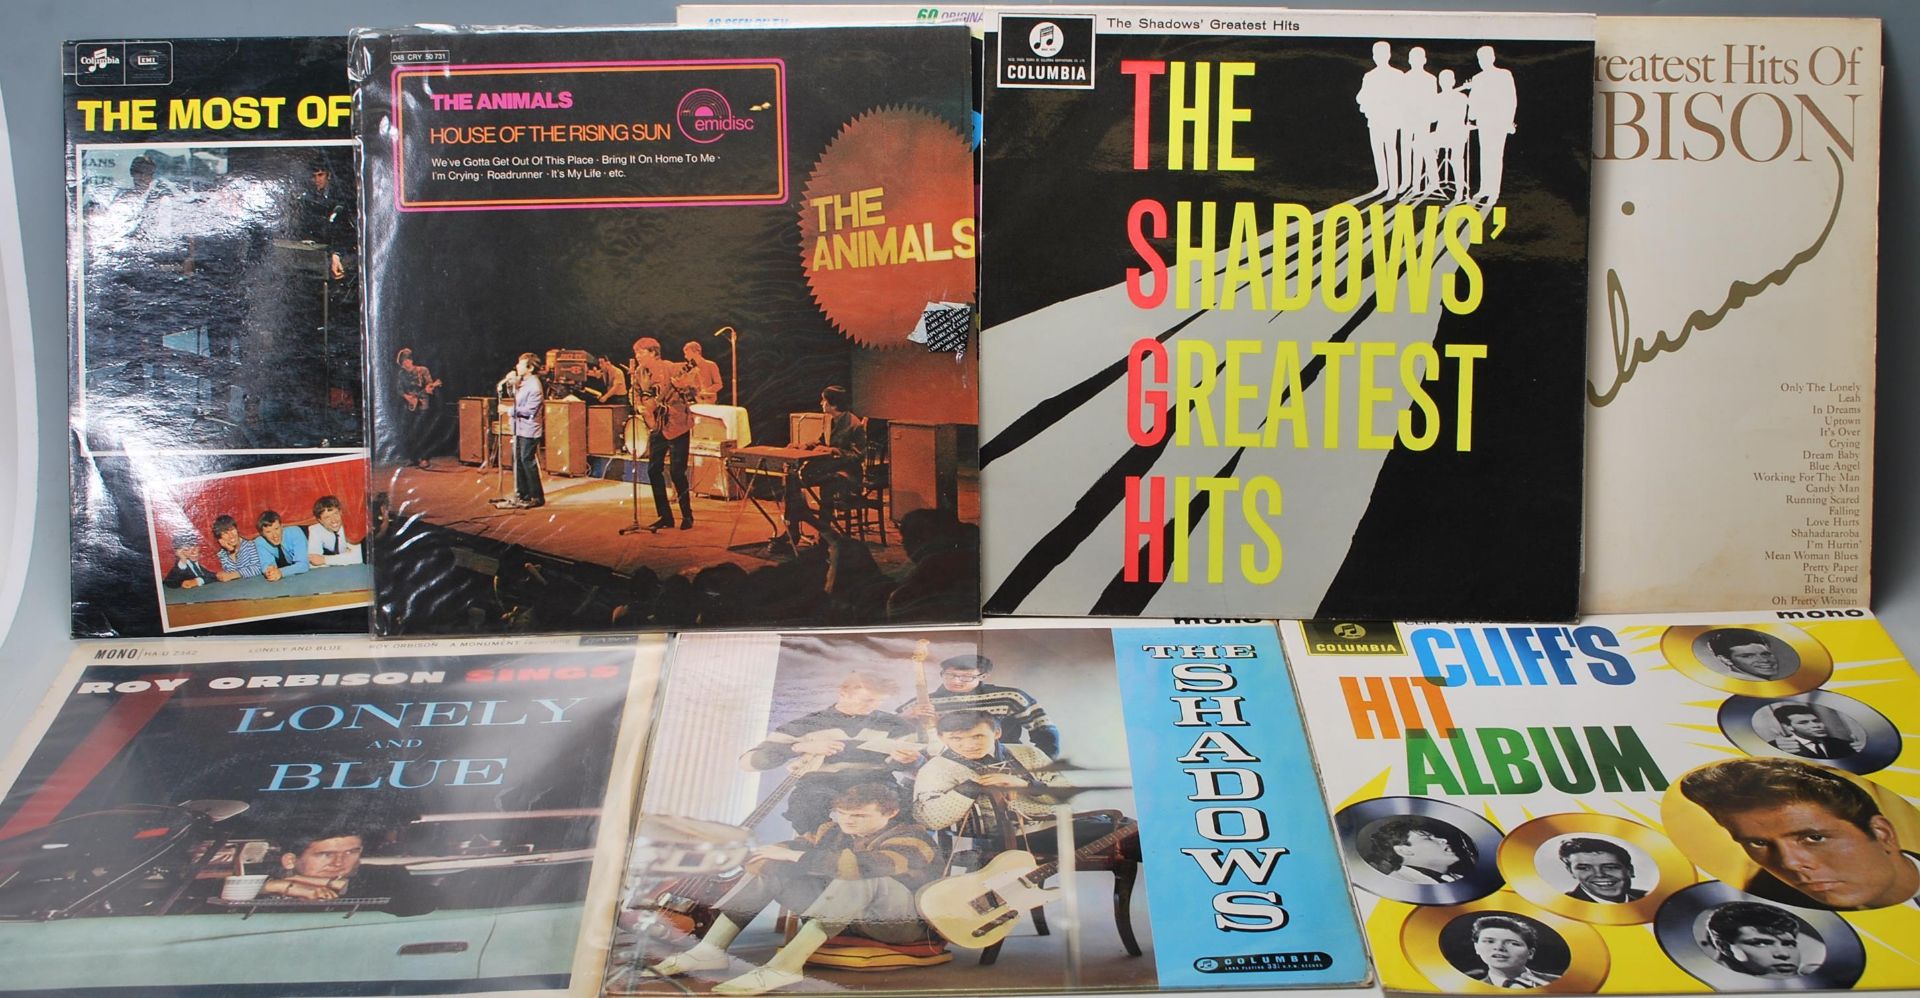 A good collection of vintage 1960’s 12" vinyl Lp records to include: The Animal - House Of The